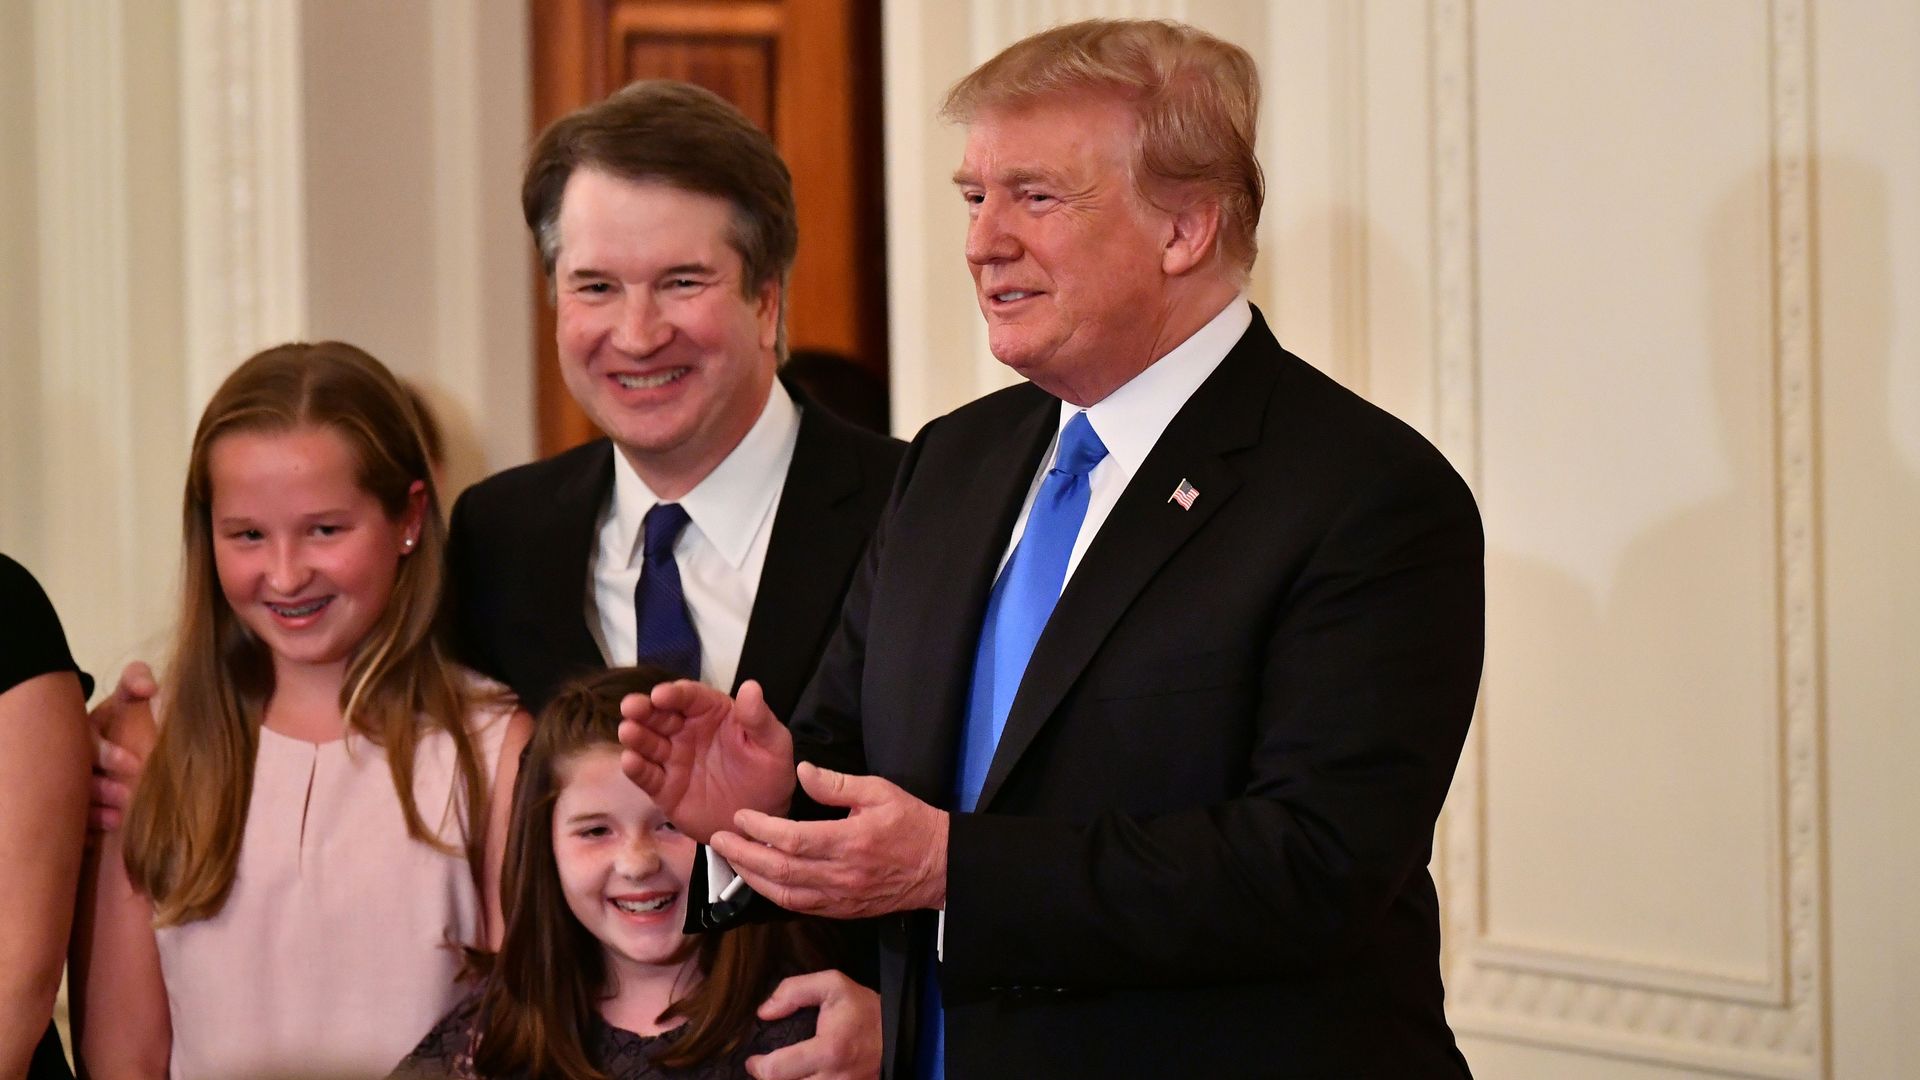 Brett Kavanaugh stands with his two daughters and President Trump.